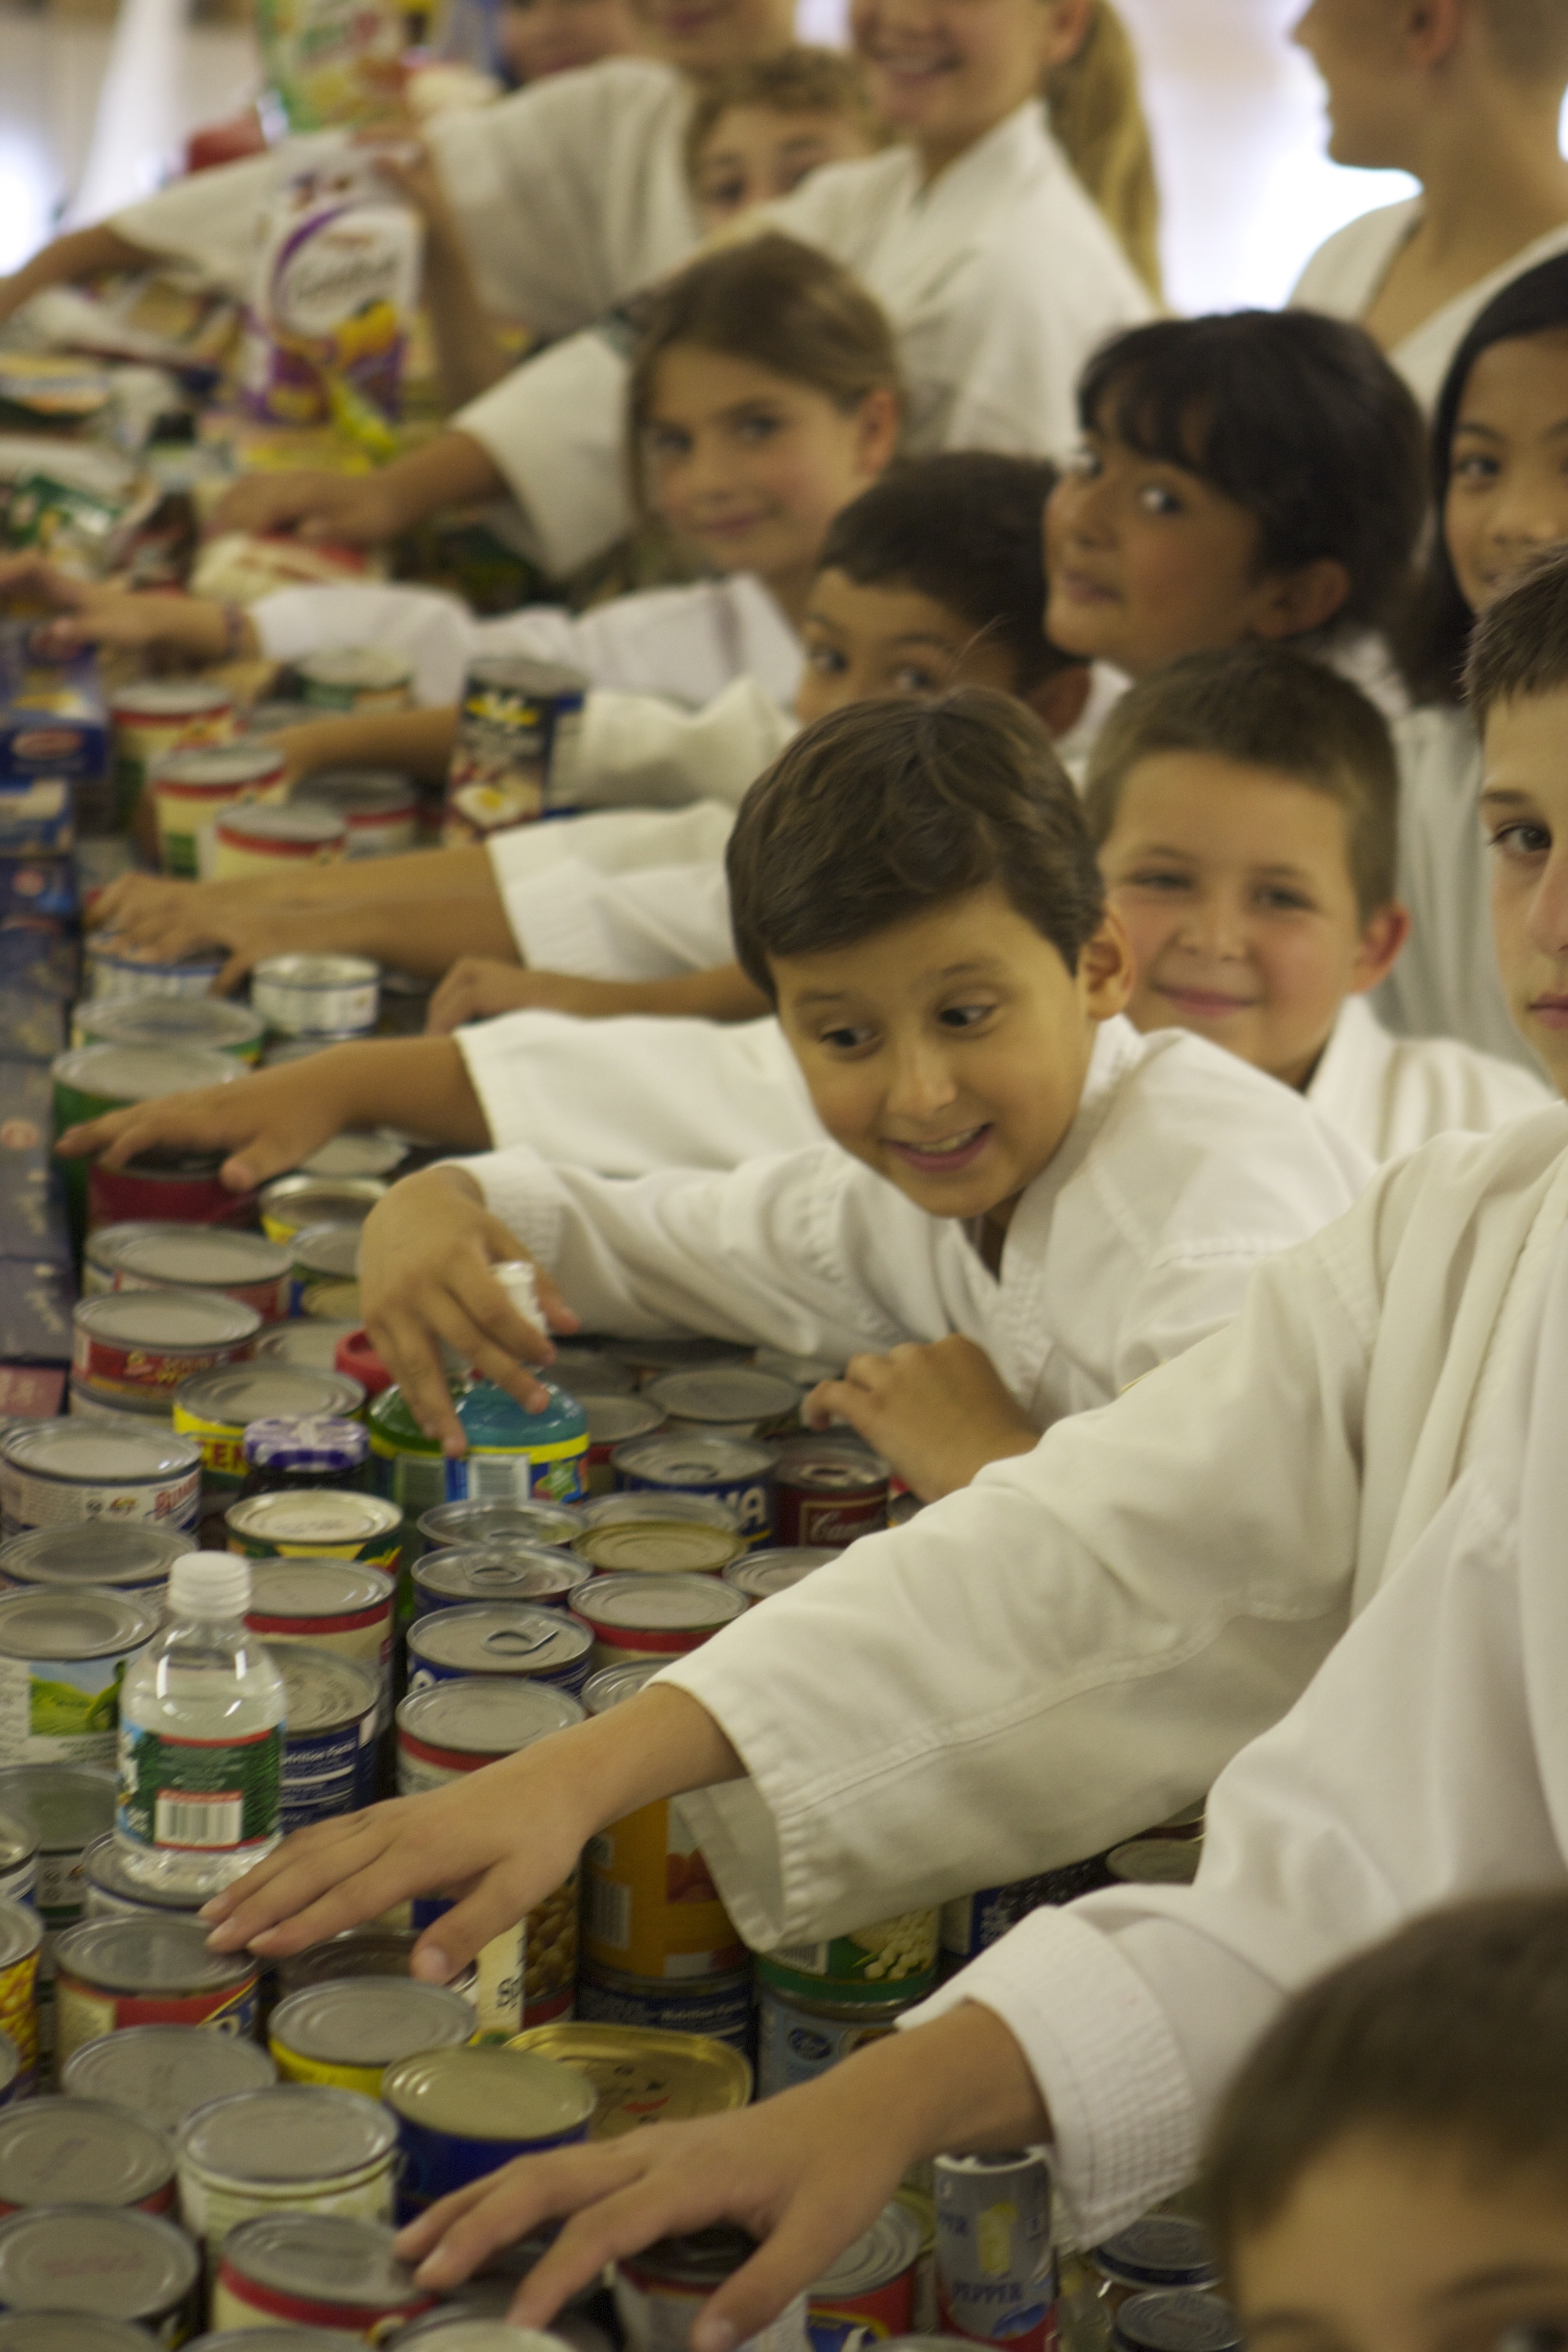 thedojo-food-drive-martial-arts-karate-kids-doing-community-service-in-rutherford-nj_14671110335_o.jpg